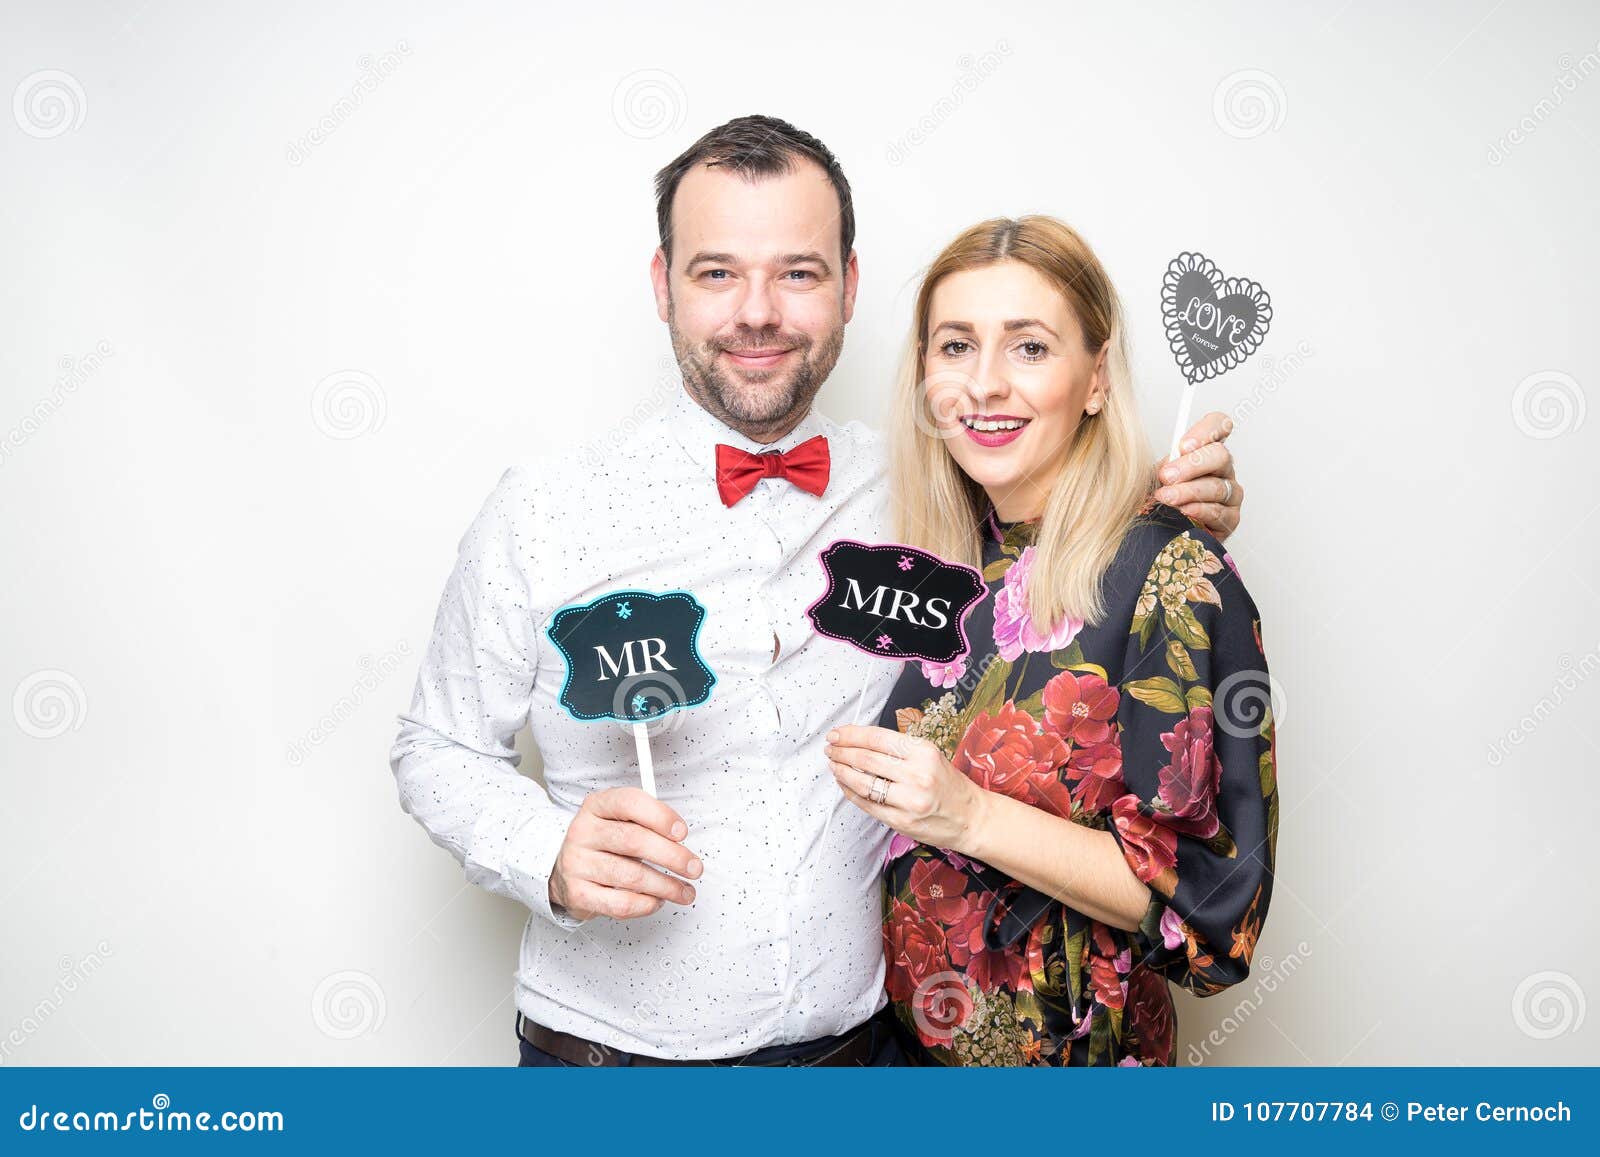 HOW A PHOTO BOOTH CAN MAKE YOUR EVENT A BLAST -